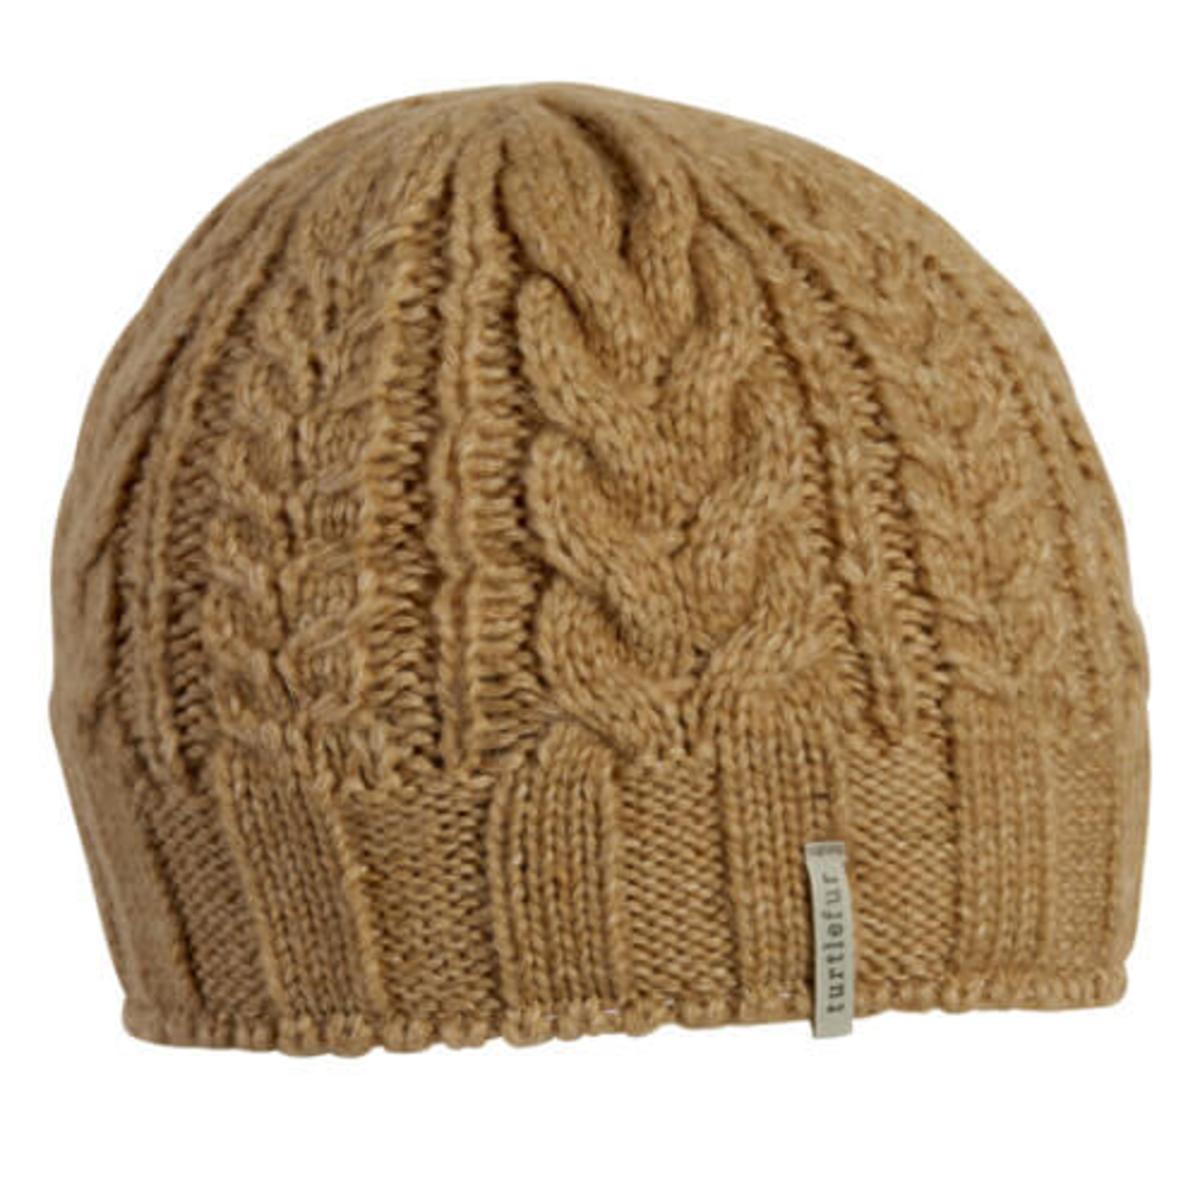 Turtle Fur Sky Beanie Recycled Knit Winter Hat Camel